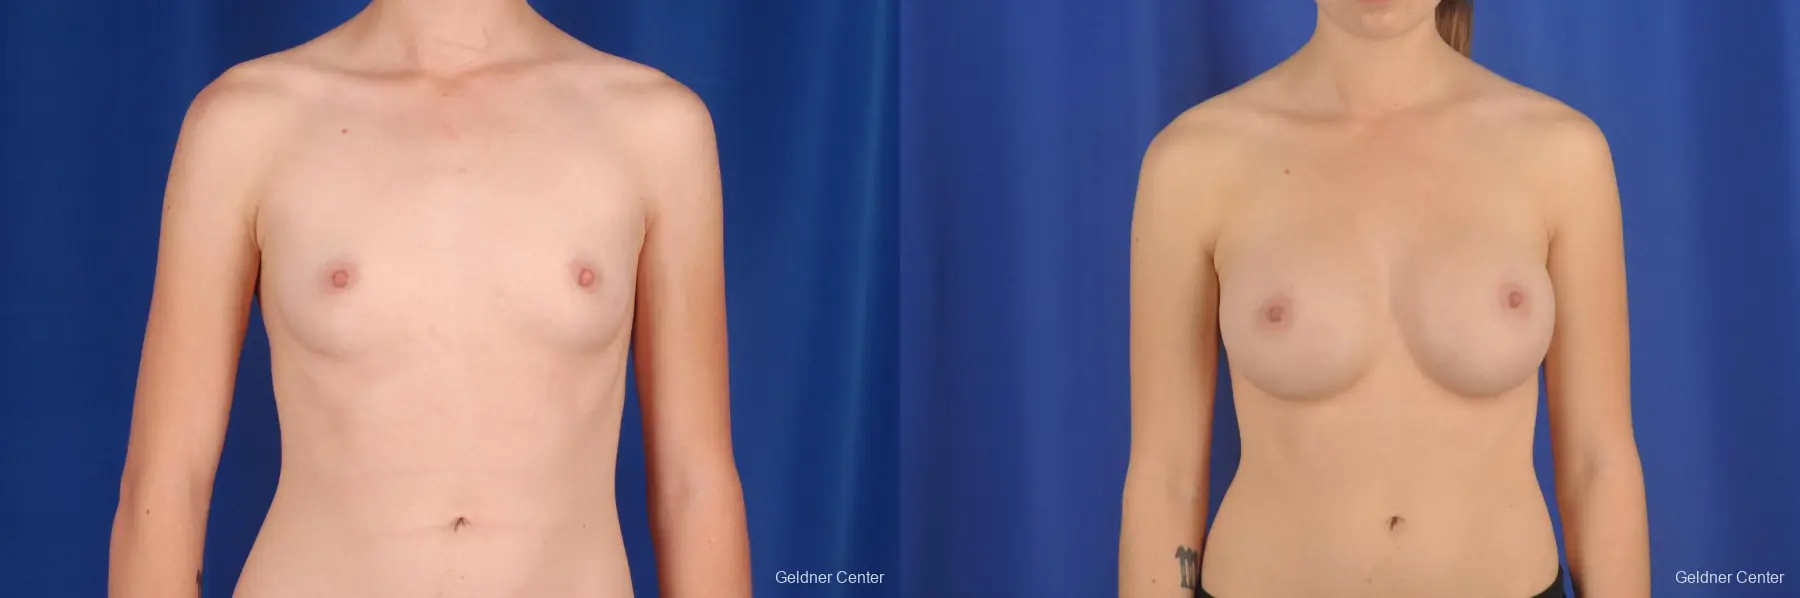 Chicago Breast Augmentation 2304 - Before and After 1